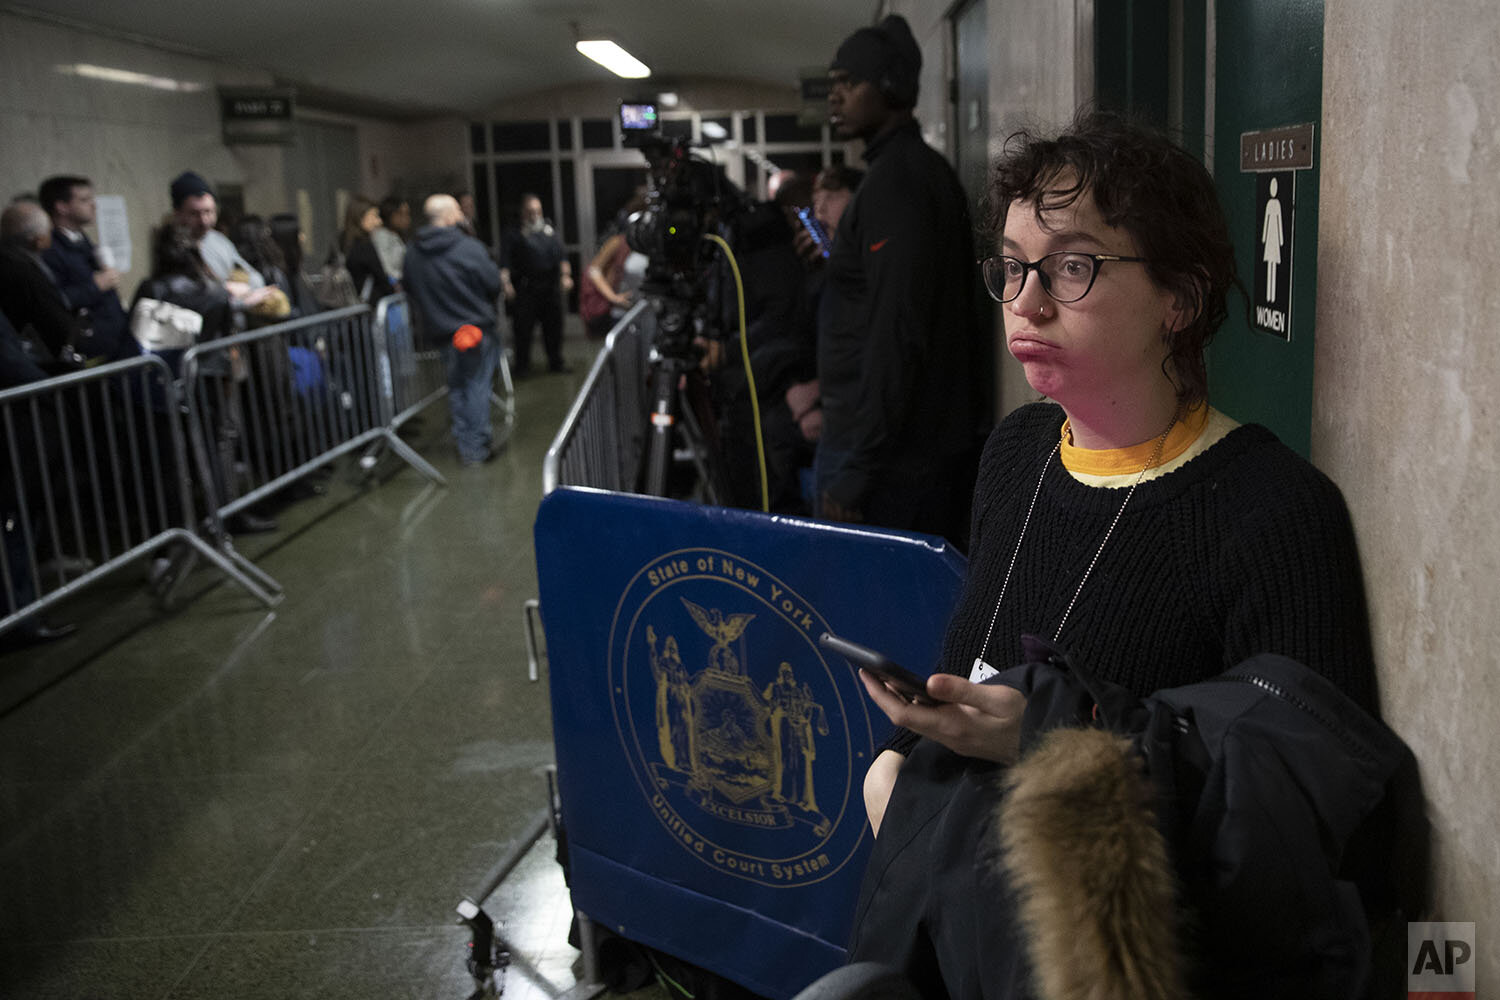  Freelance reporter working for Vulture magazine Victoria Bekiempis waits in the hallway during Harvey Weinstein’s rape trial, Tuesday, Feb. 18, 2020, in New York. (AP Photo/Mary Altaffer) 